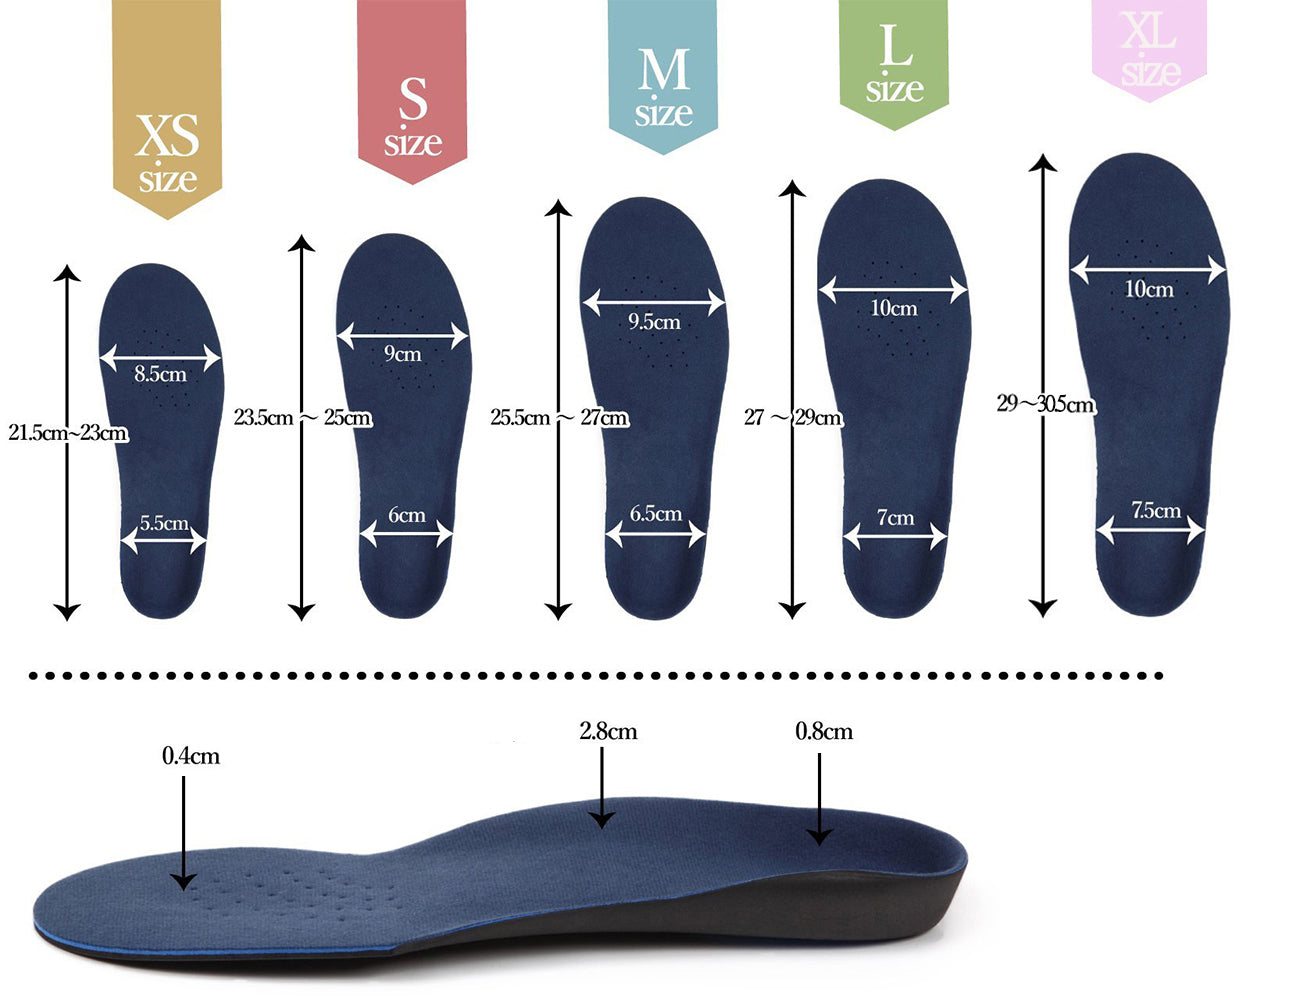 ZSZBACE Comfort Insoles For Sports And Everyday, Orthotic Foot Insole For Bow Supports, Cushioning And Painful Heel Spur